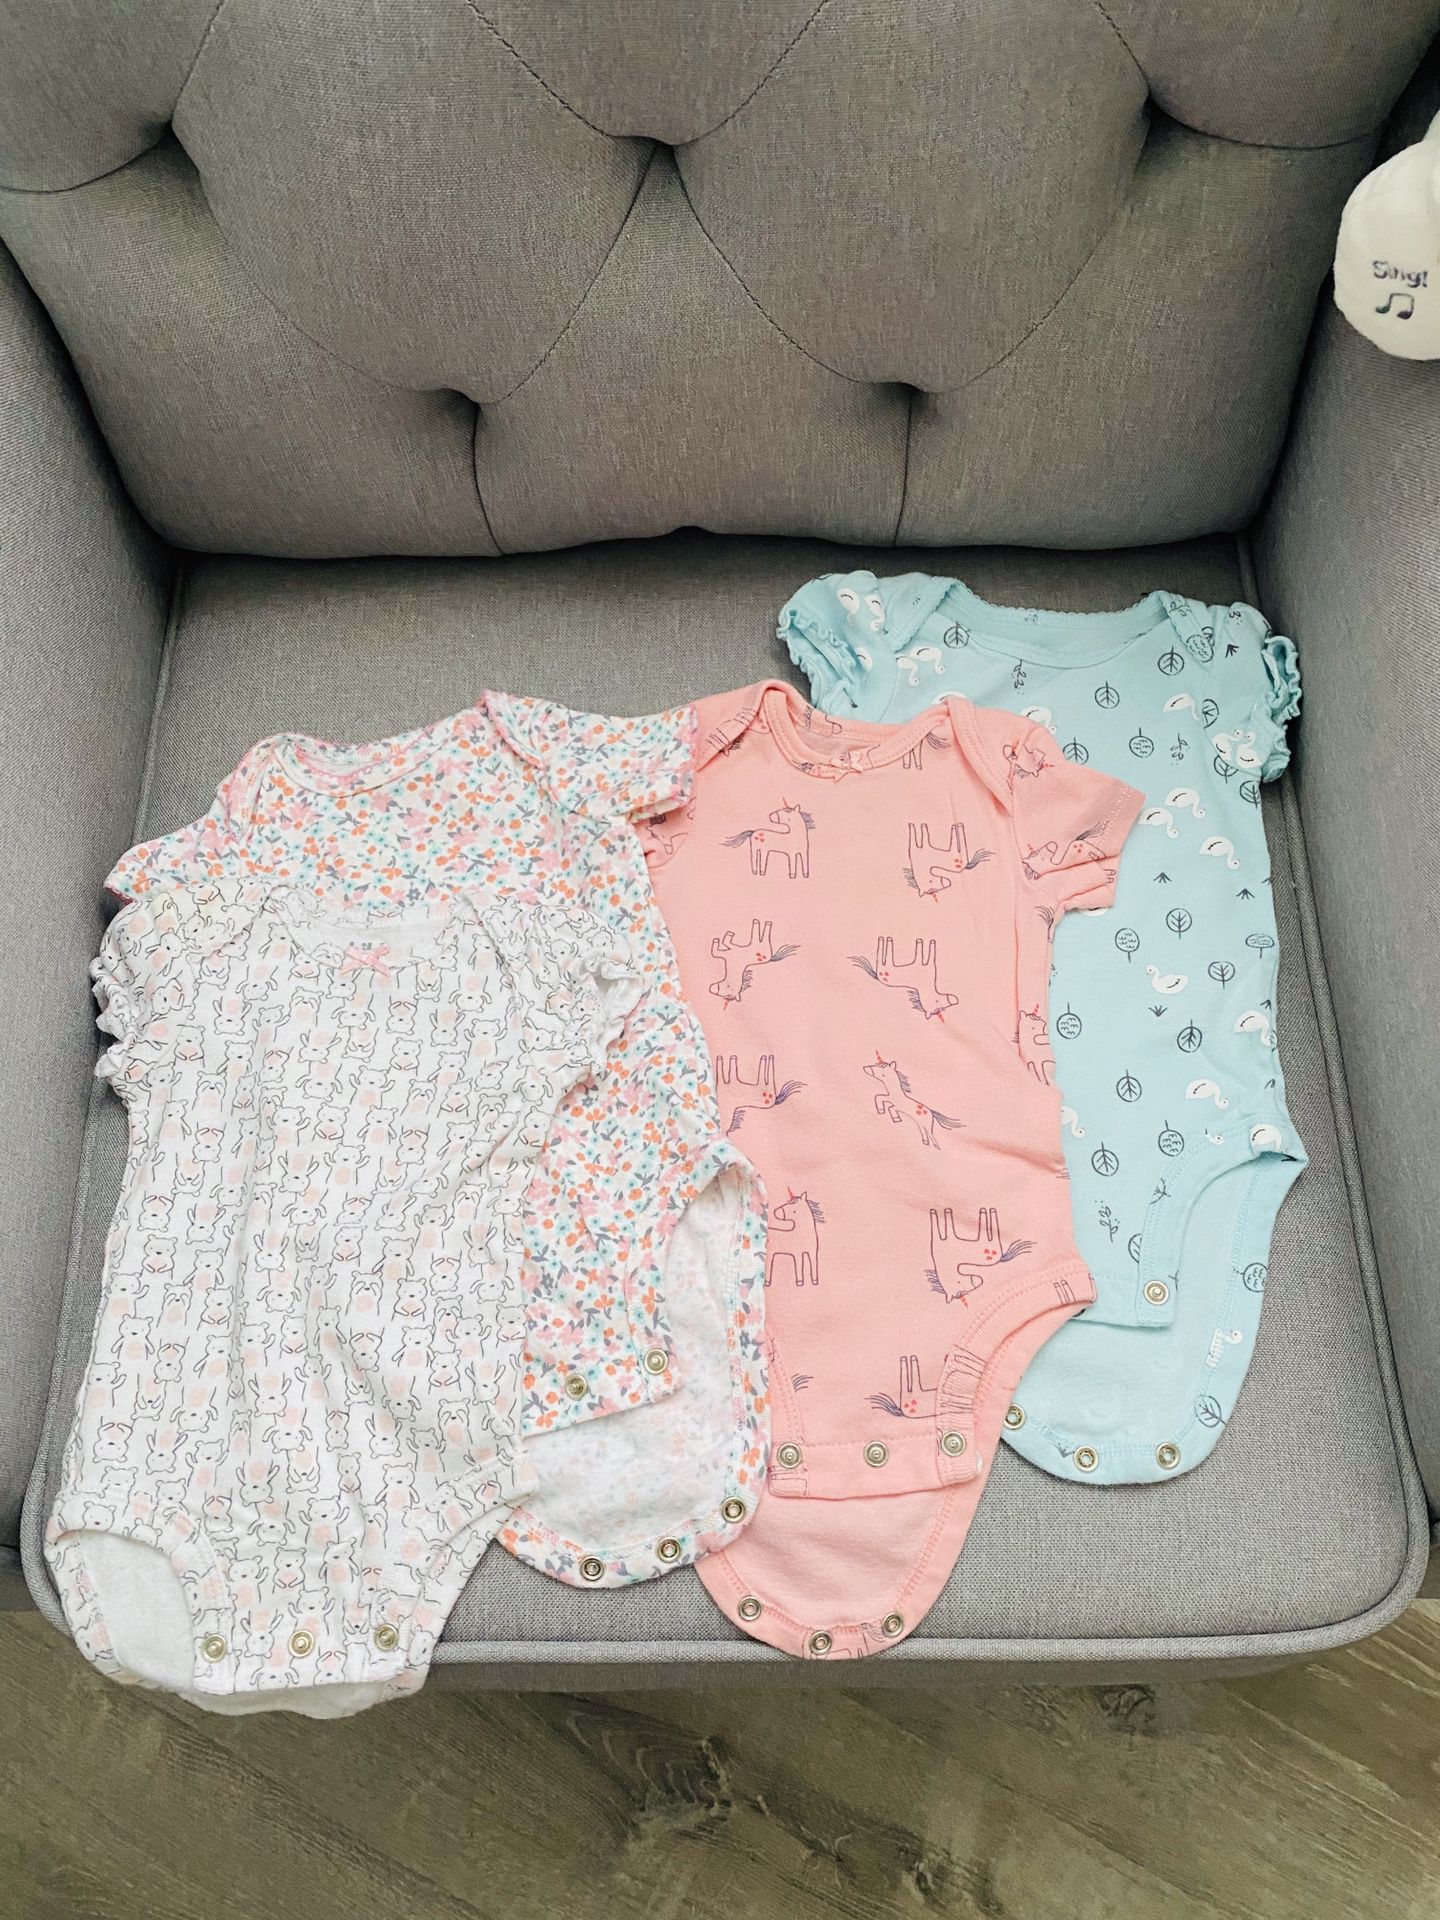 Baby clothes 3 months